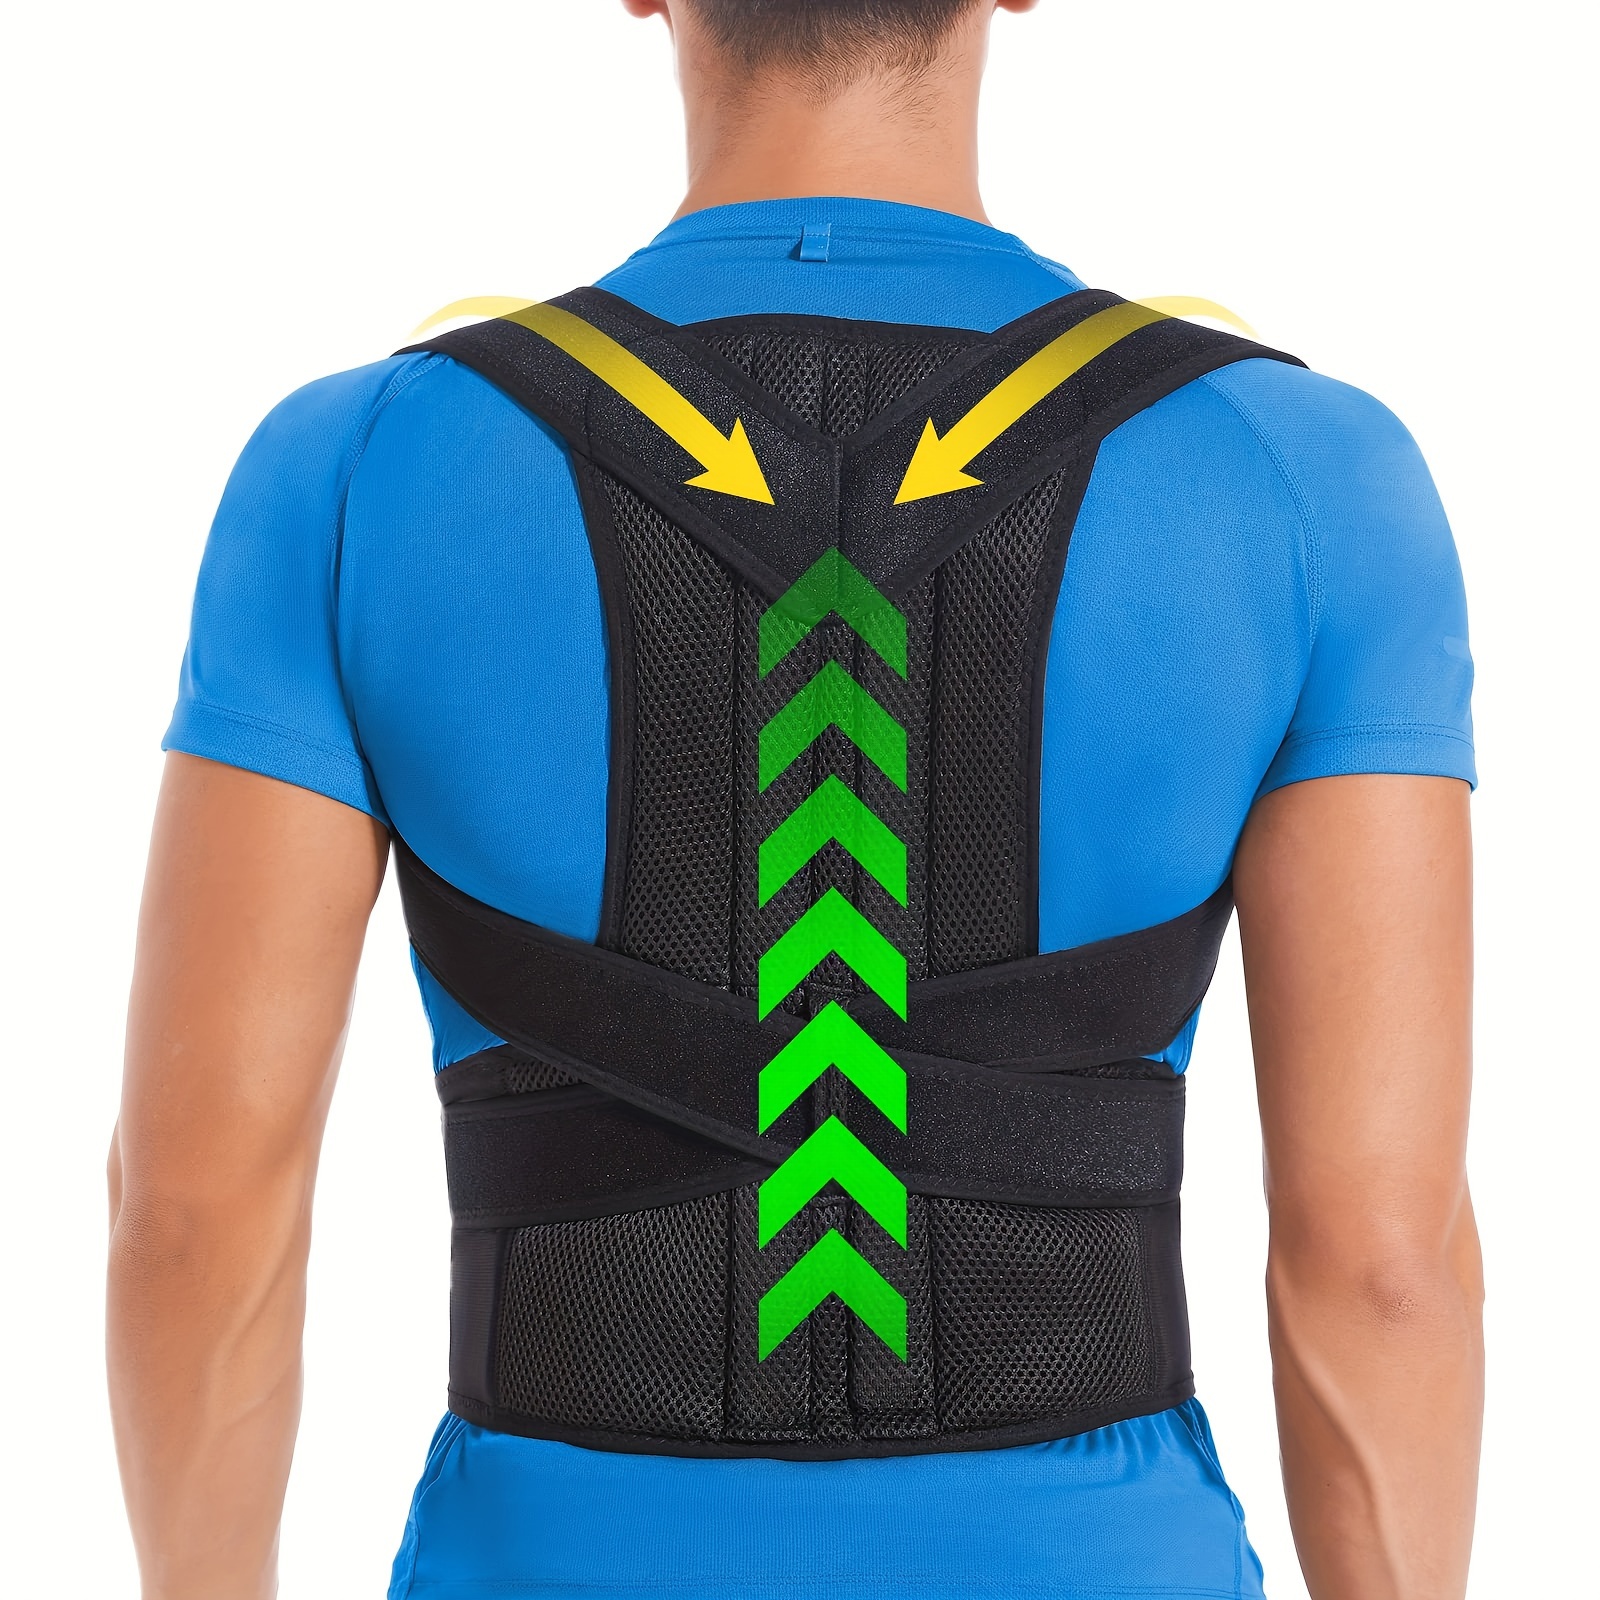 MALOOW Flexible Posture Correcting Back Brace for Upper Body Pain